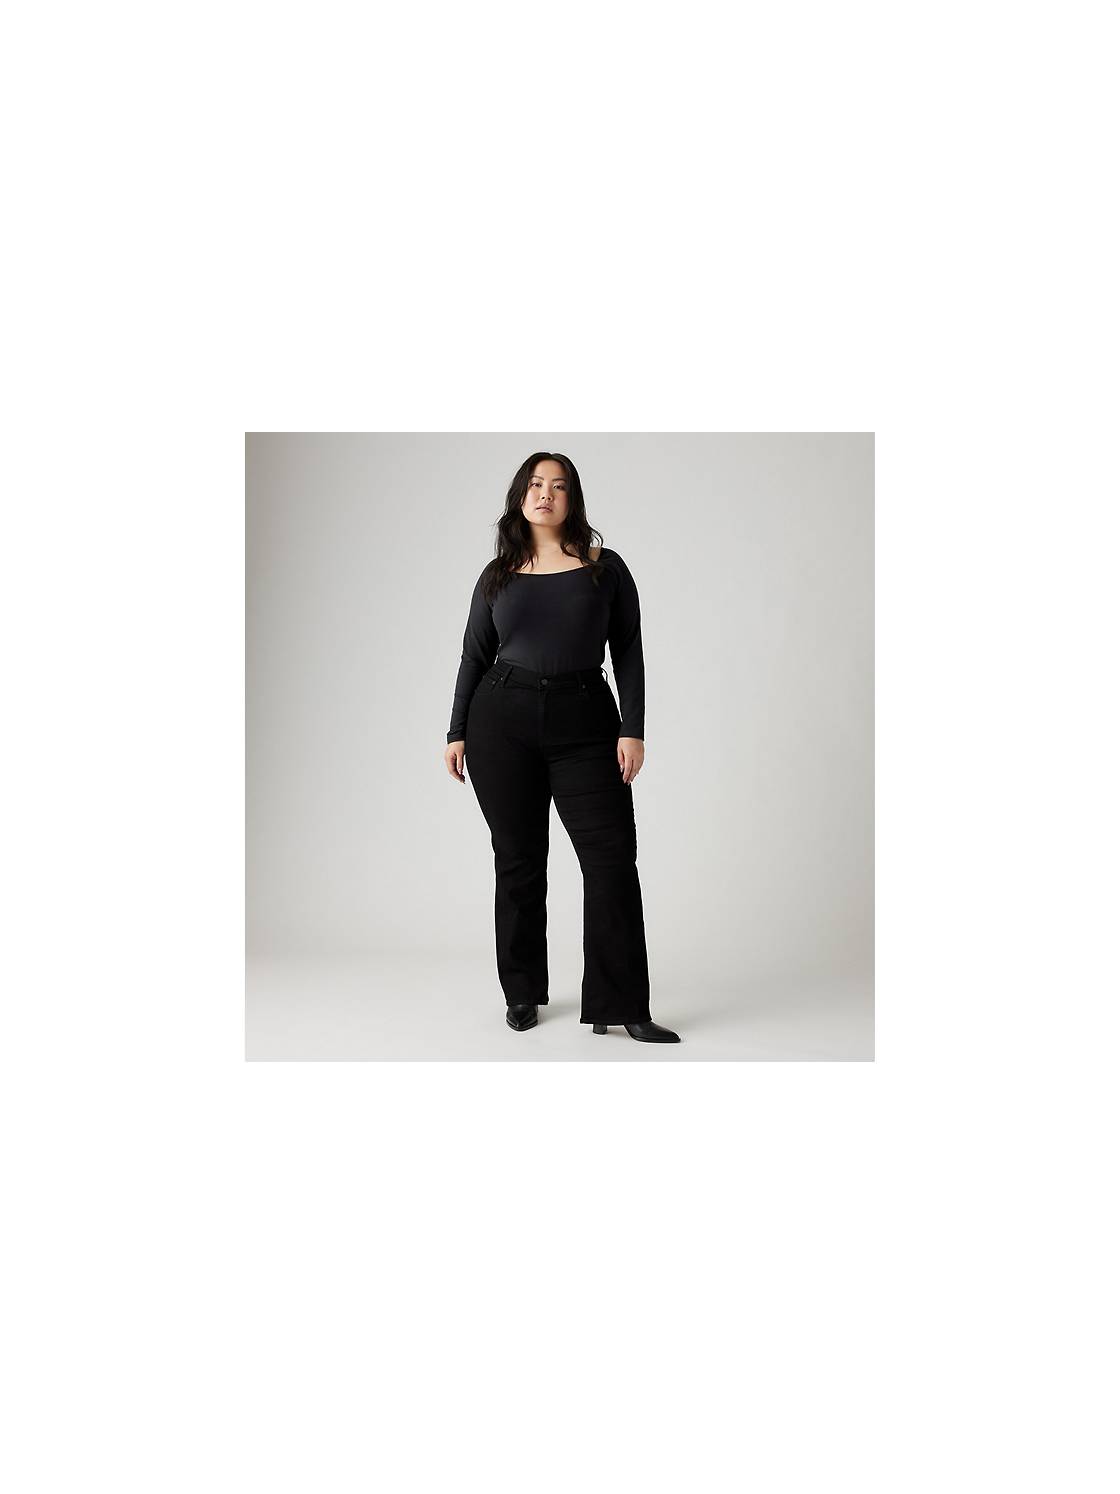 725™ High Rise Bootcut Jeans (Plus Size) 1